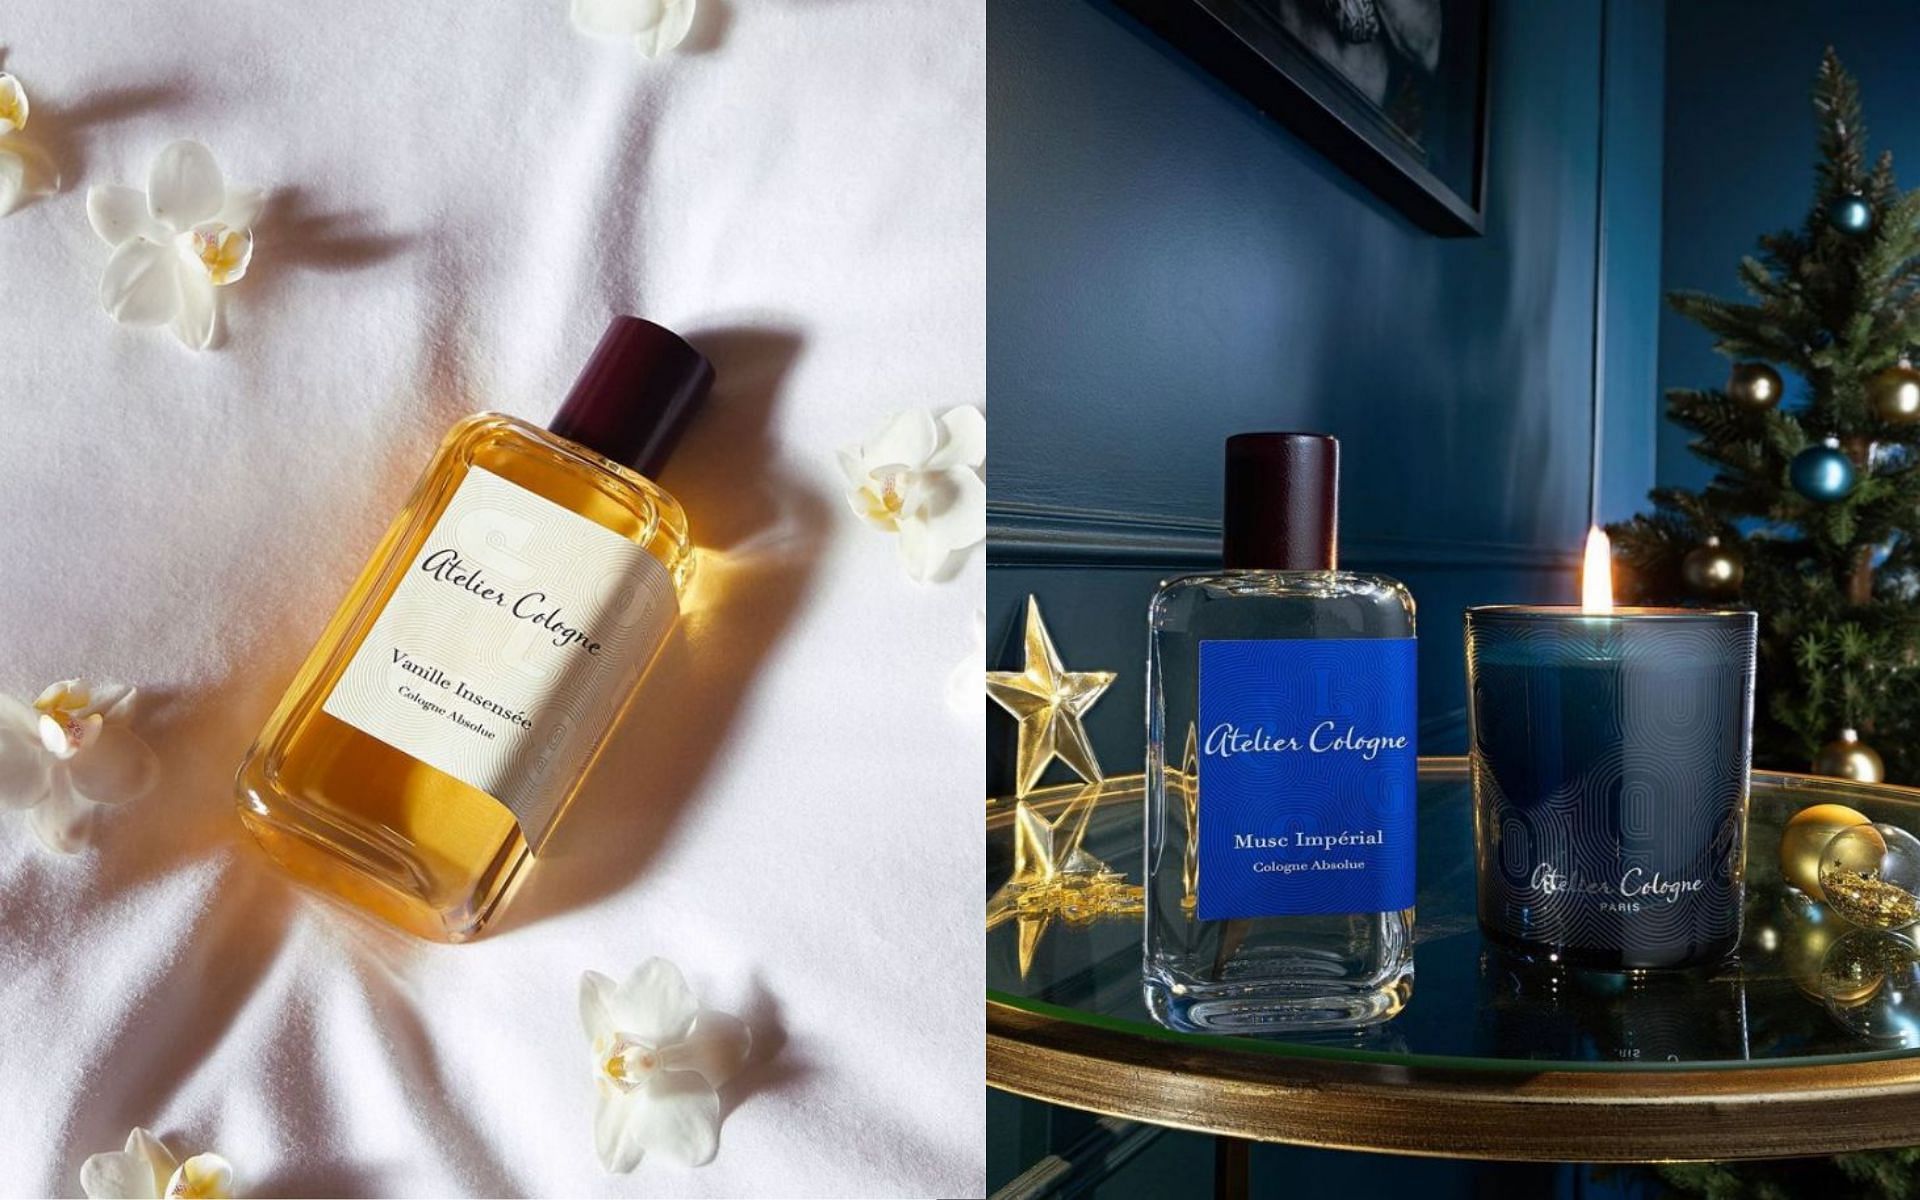 Where to buy Atelier Cologne from? Brand's exit drama explained as Sephora  offers discount on perfumes